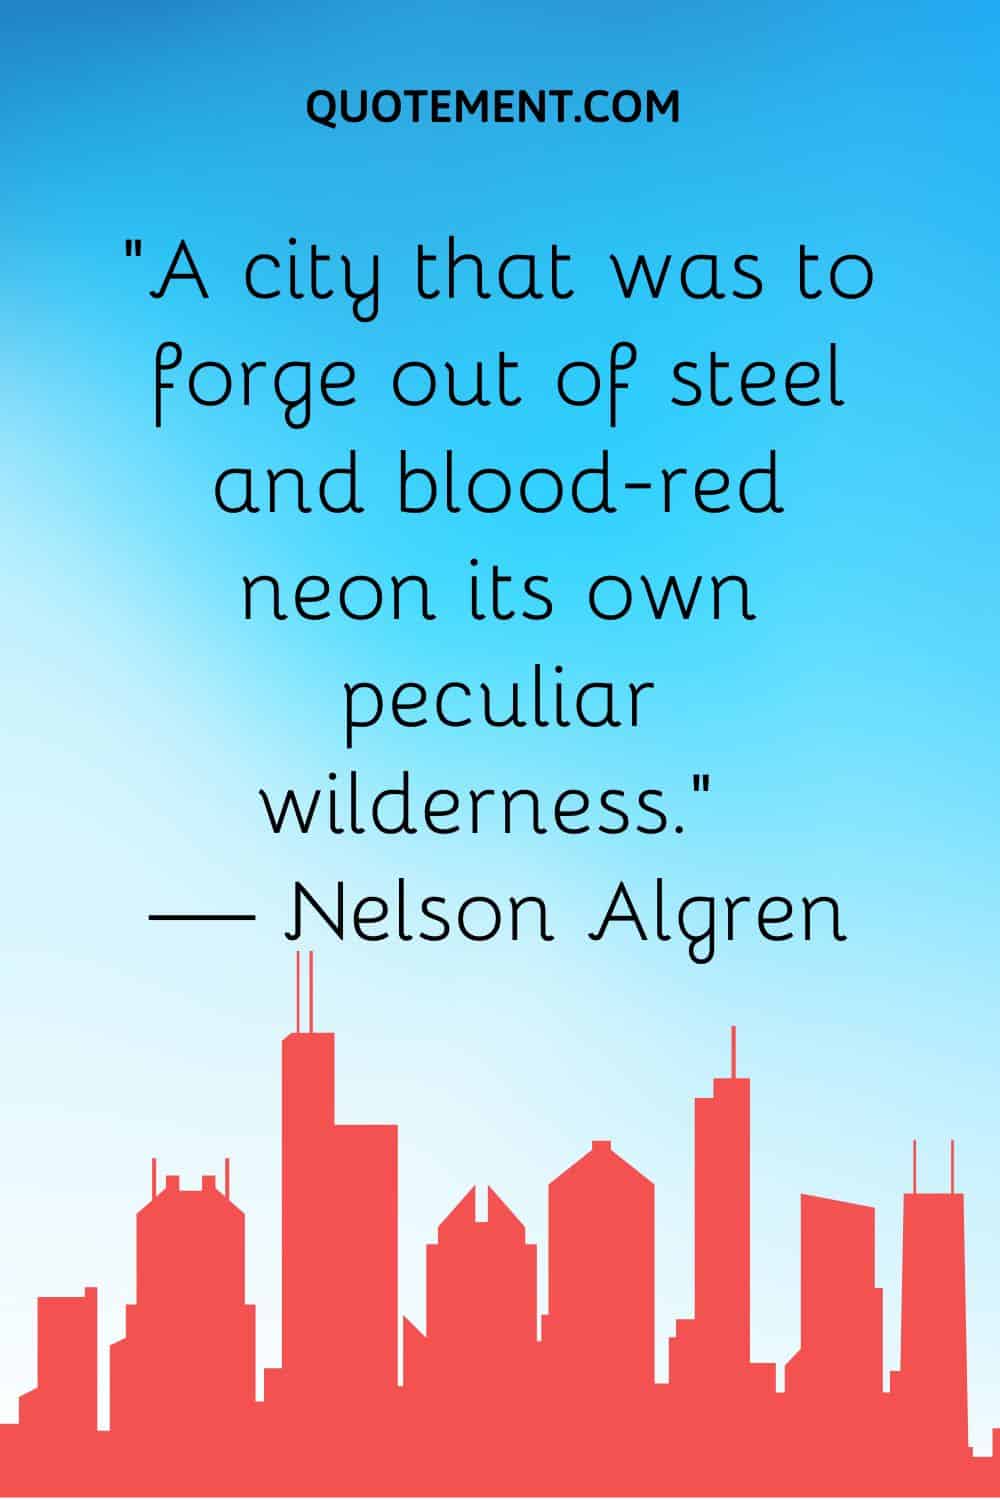 “A city that was to forge out of steel and blood-red neon its own peculiar wilderness.” — Nelson Algren